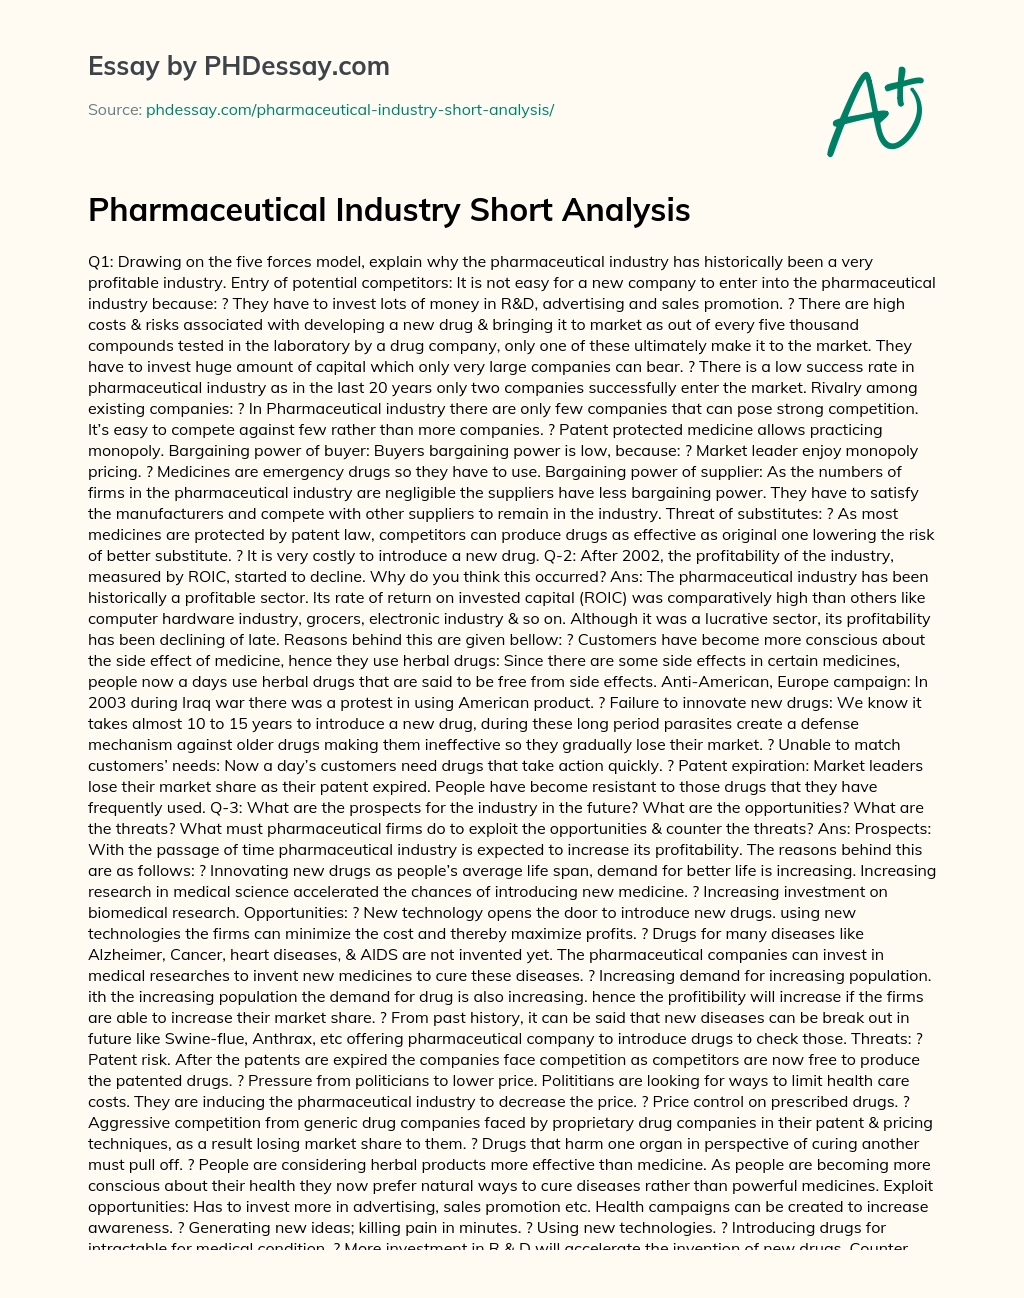 essay on pharmaceutical industry